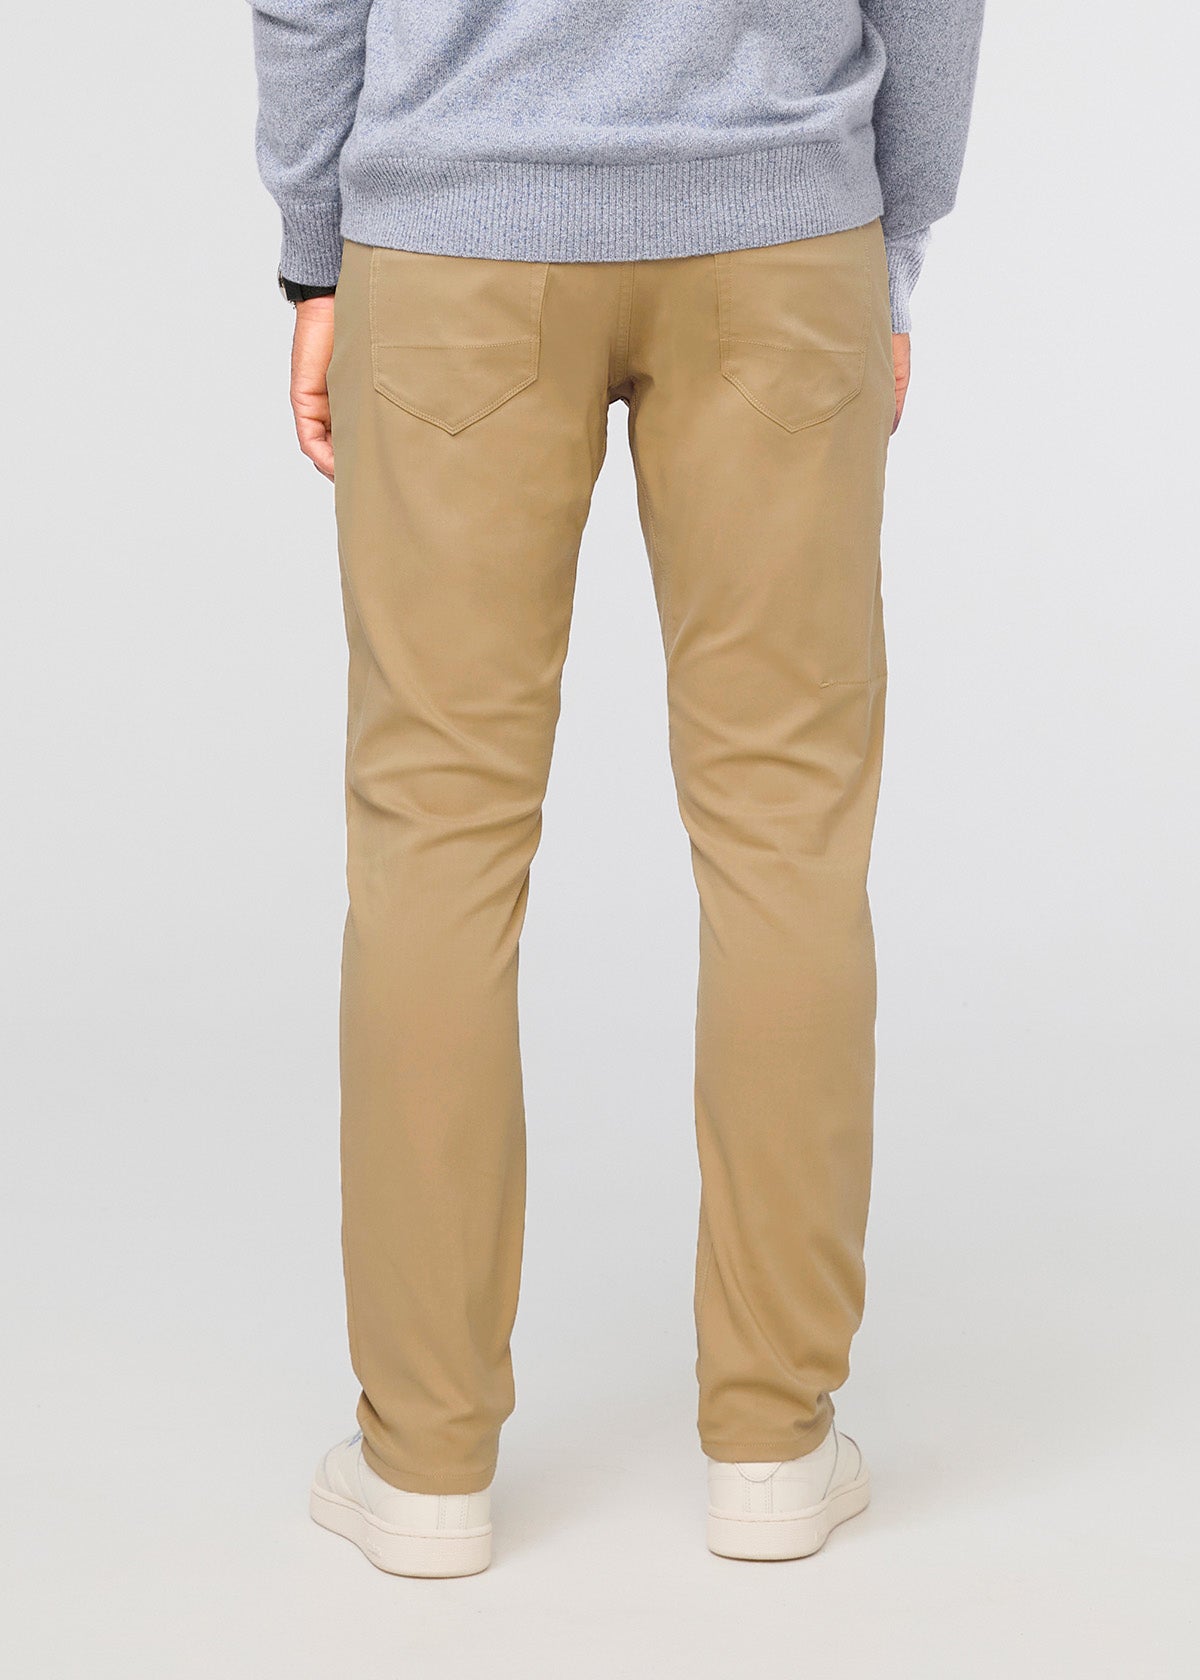 mens khaki relaxed fit stretch pant back